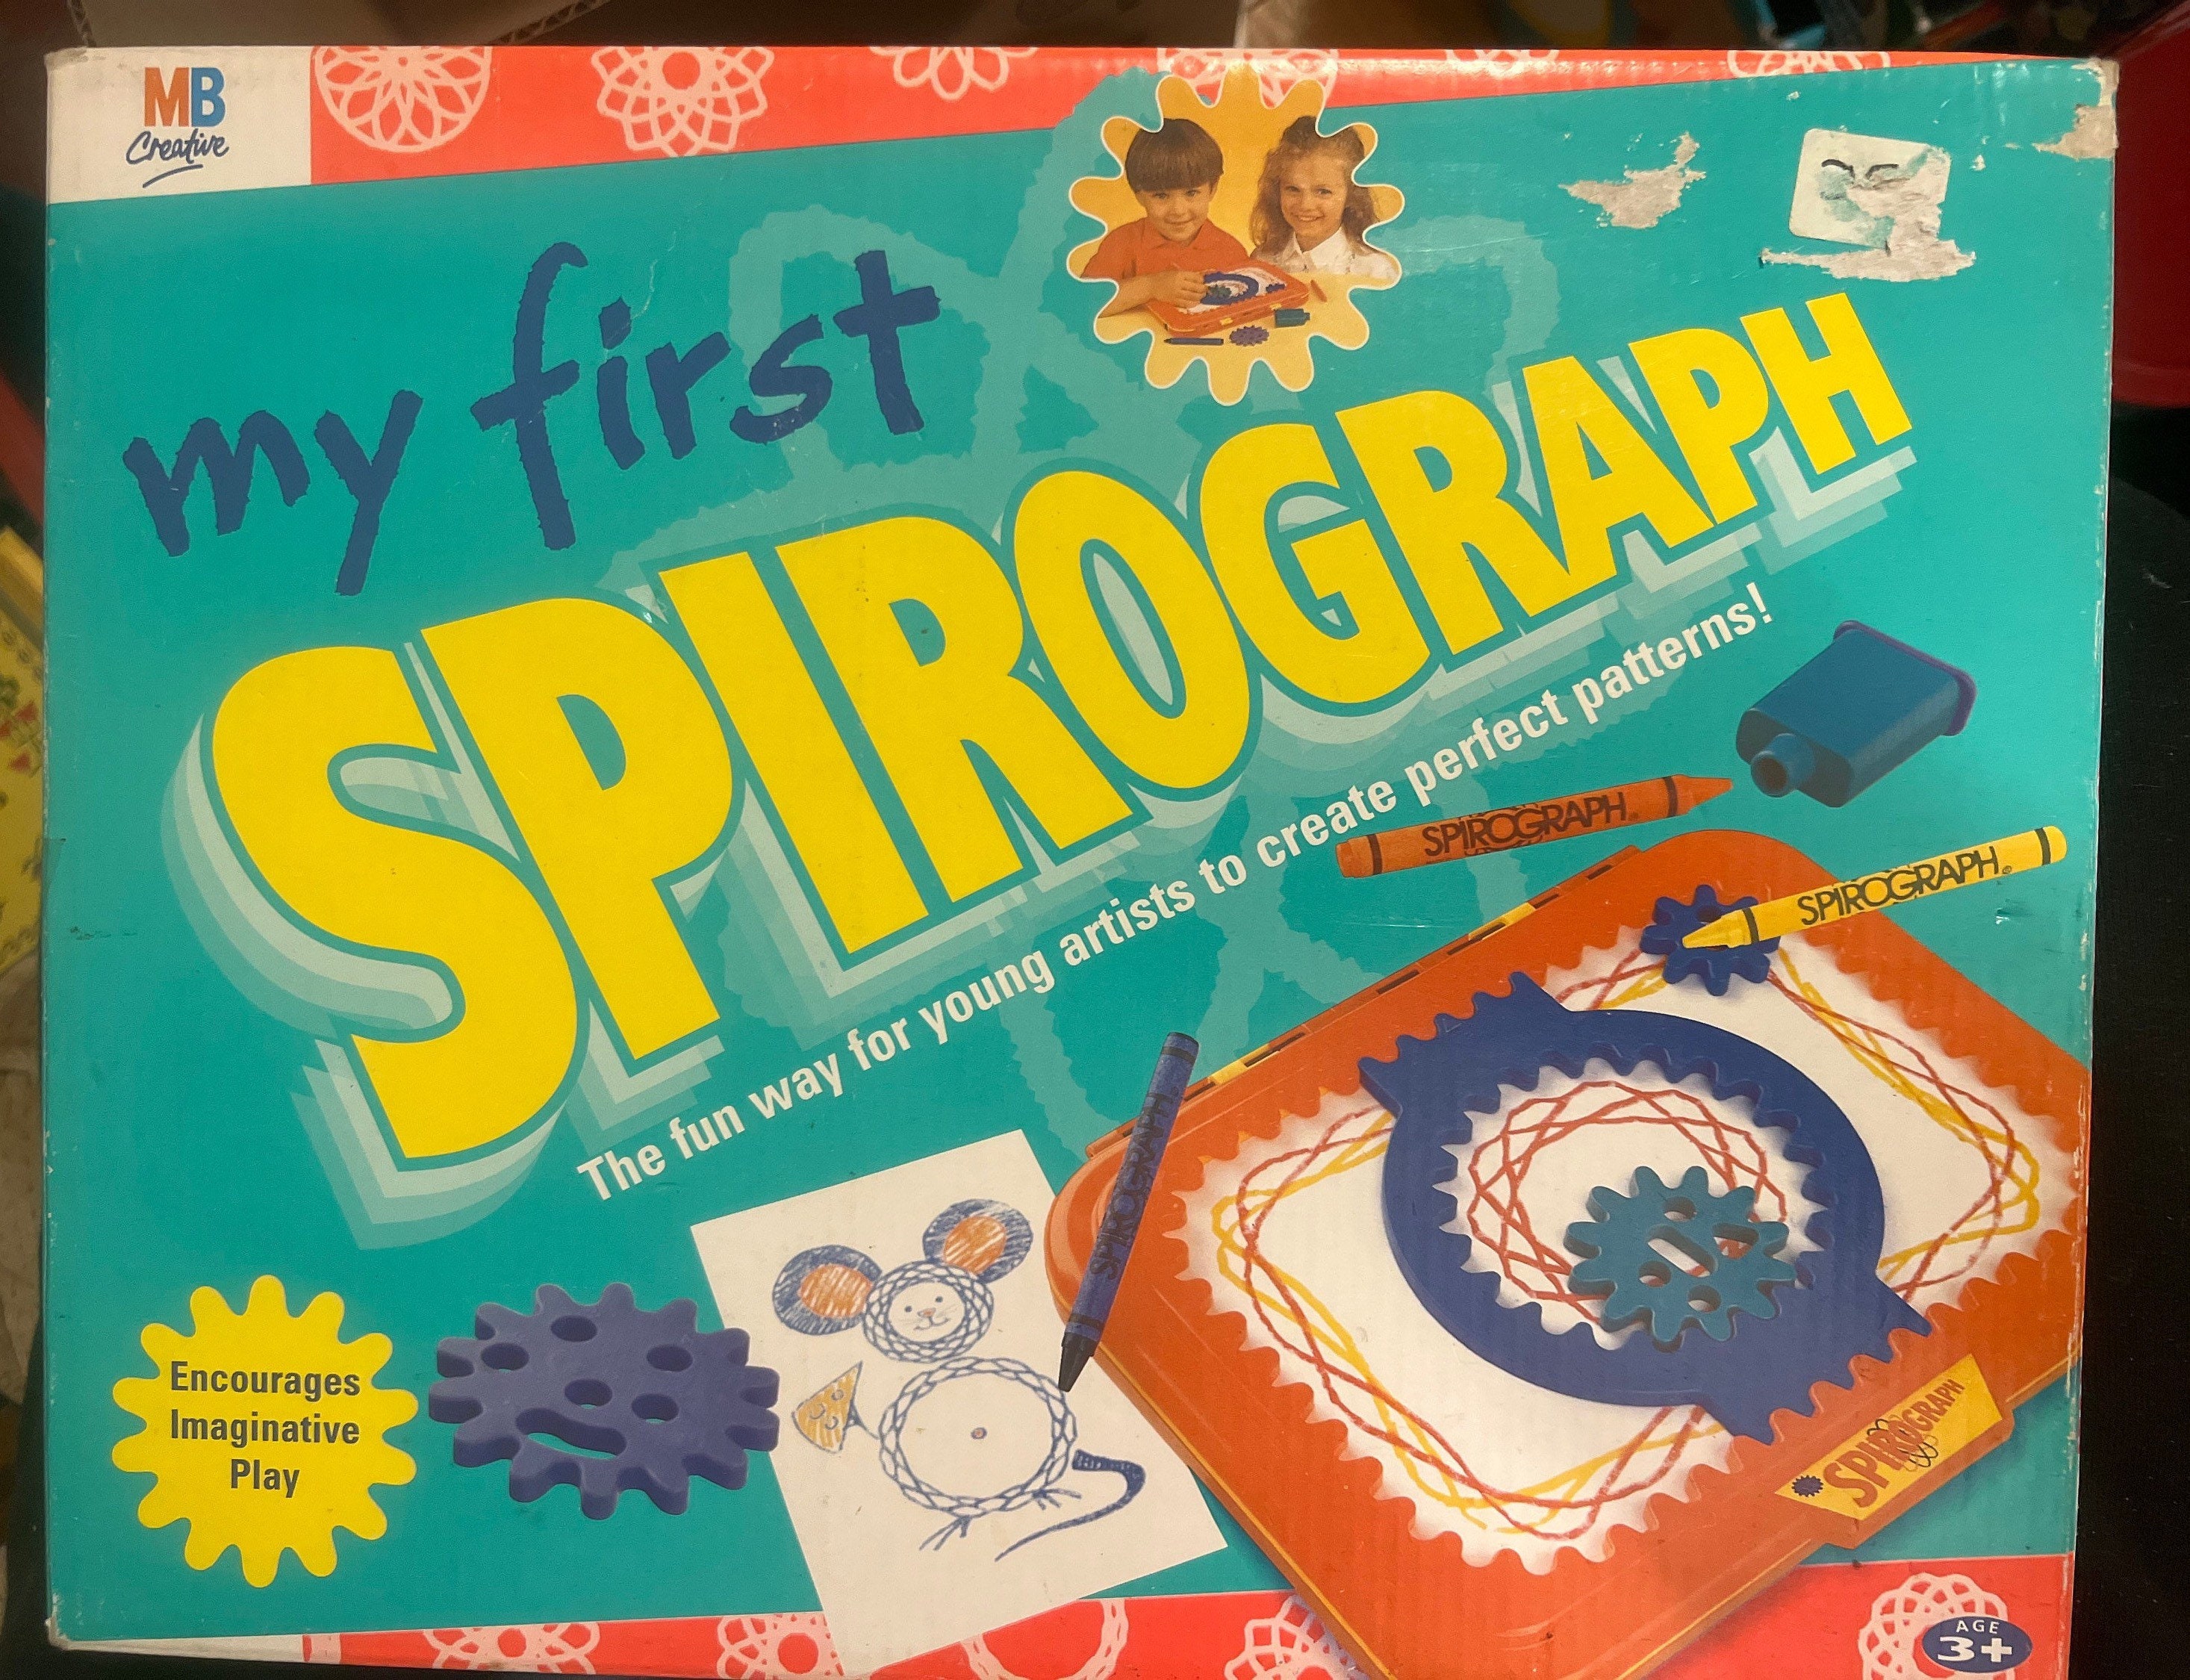 Behold the greatest spirographs in the world